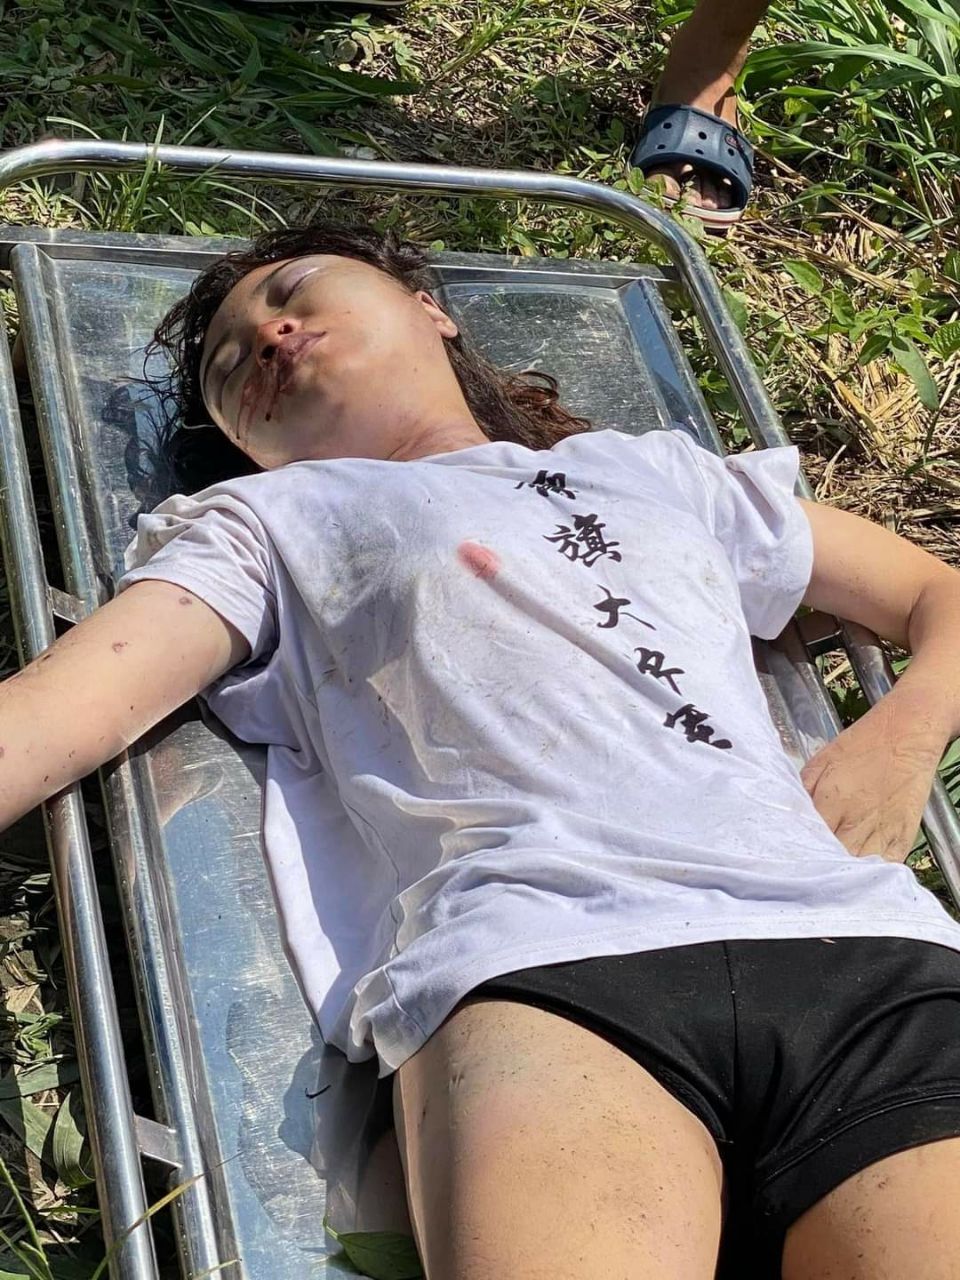 The corpse of a Chinese girl with strangulation marks